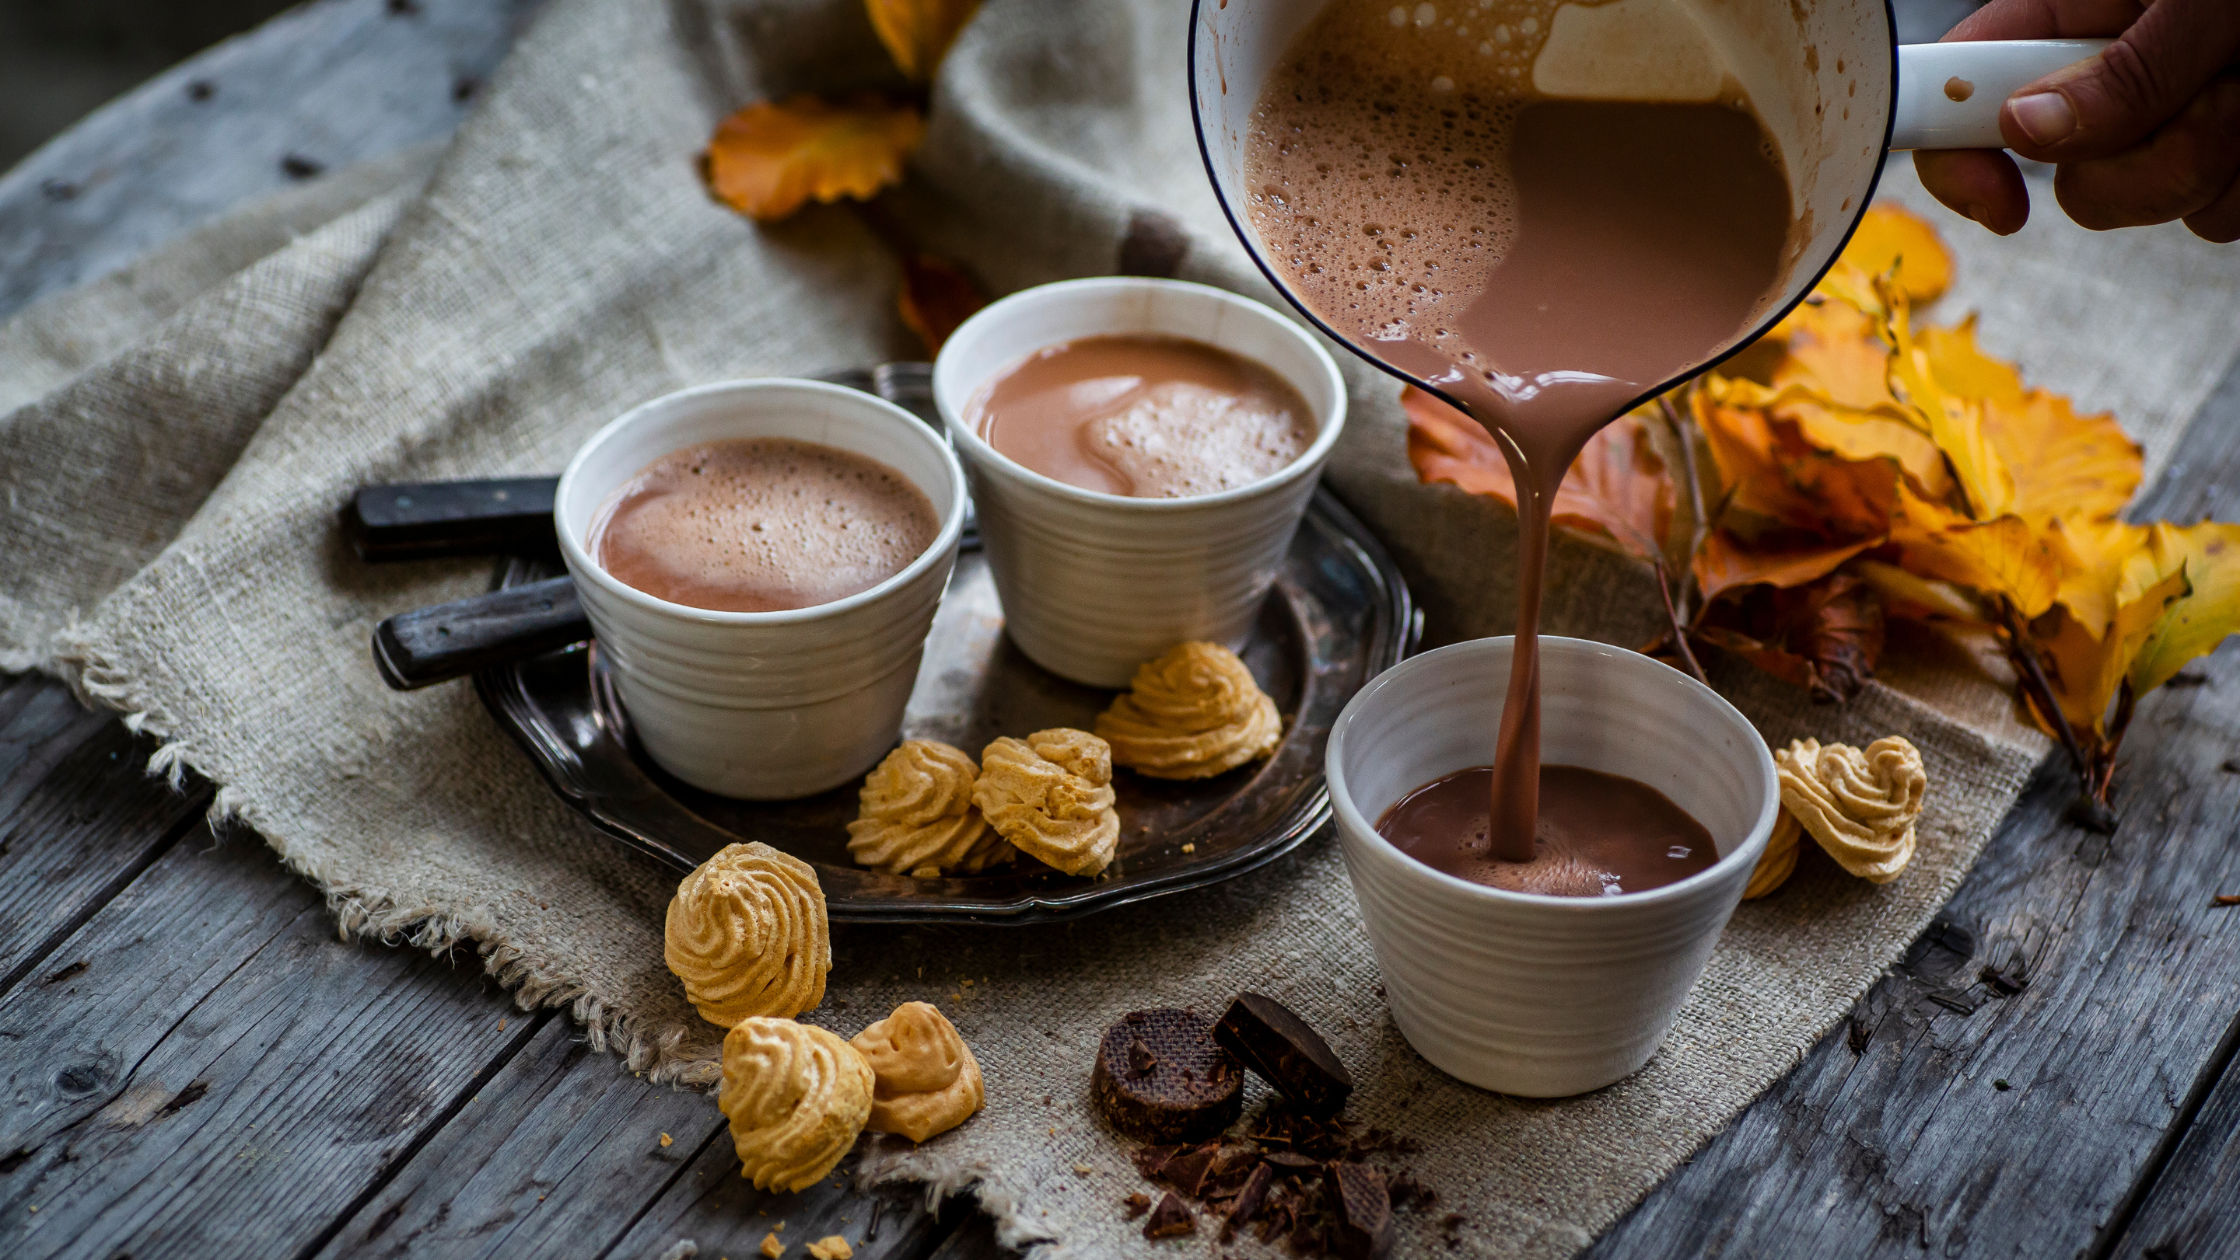 Sipping Wellness: Nutrient-Rich Hot Chocolates and Local Apple Cider